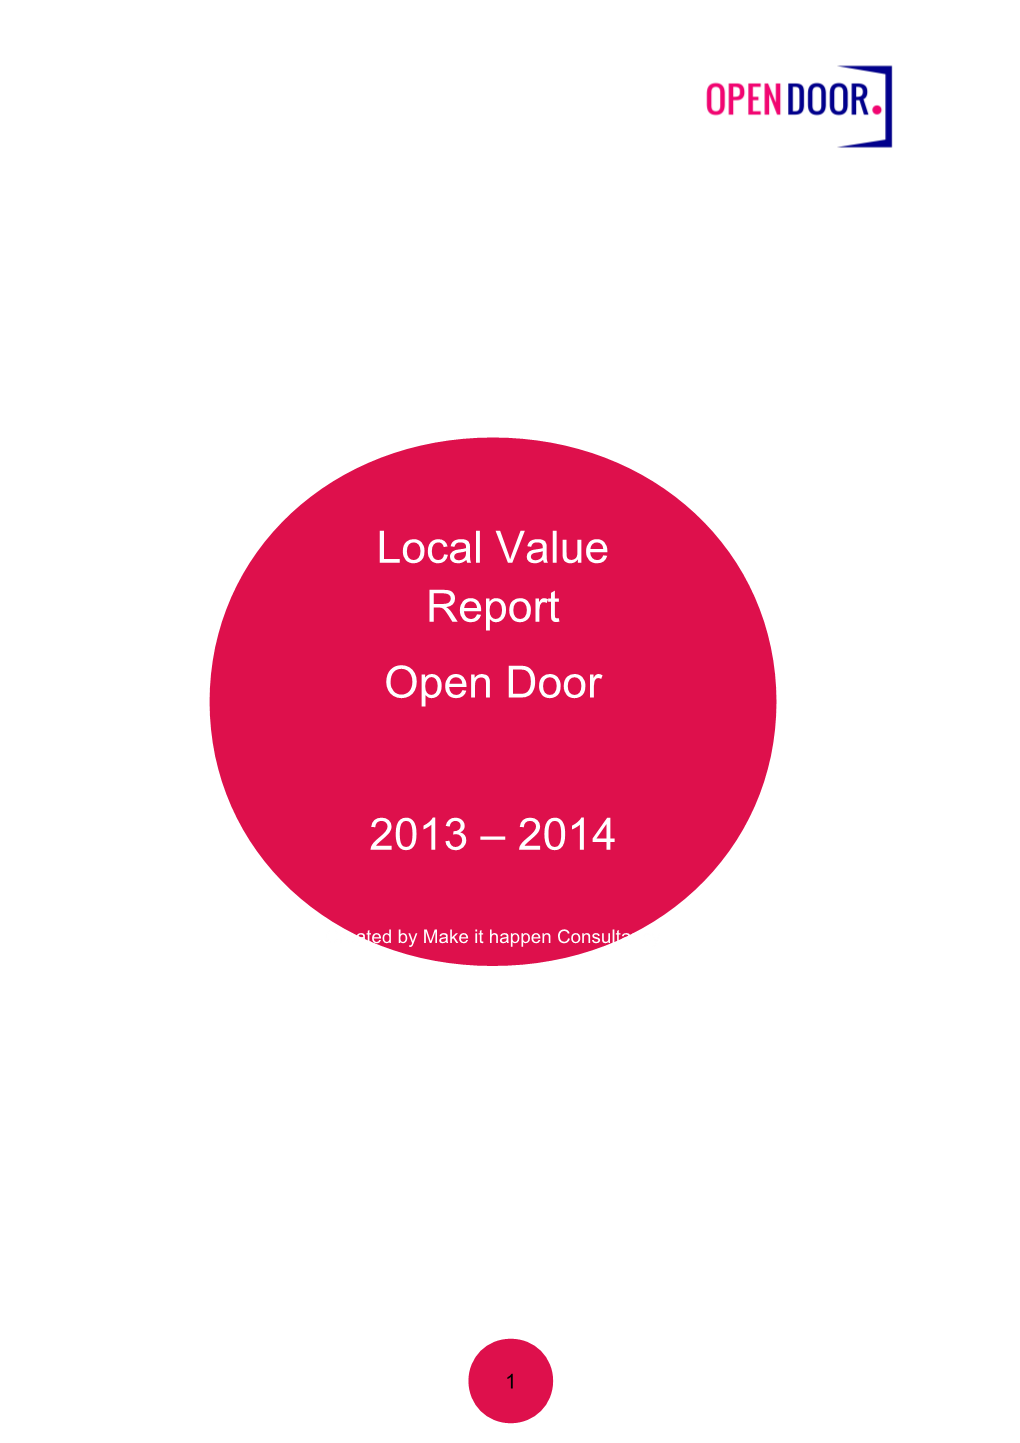 Contents Introduction Local Value